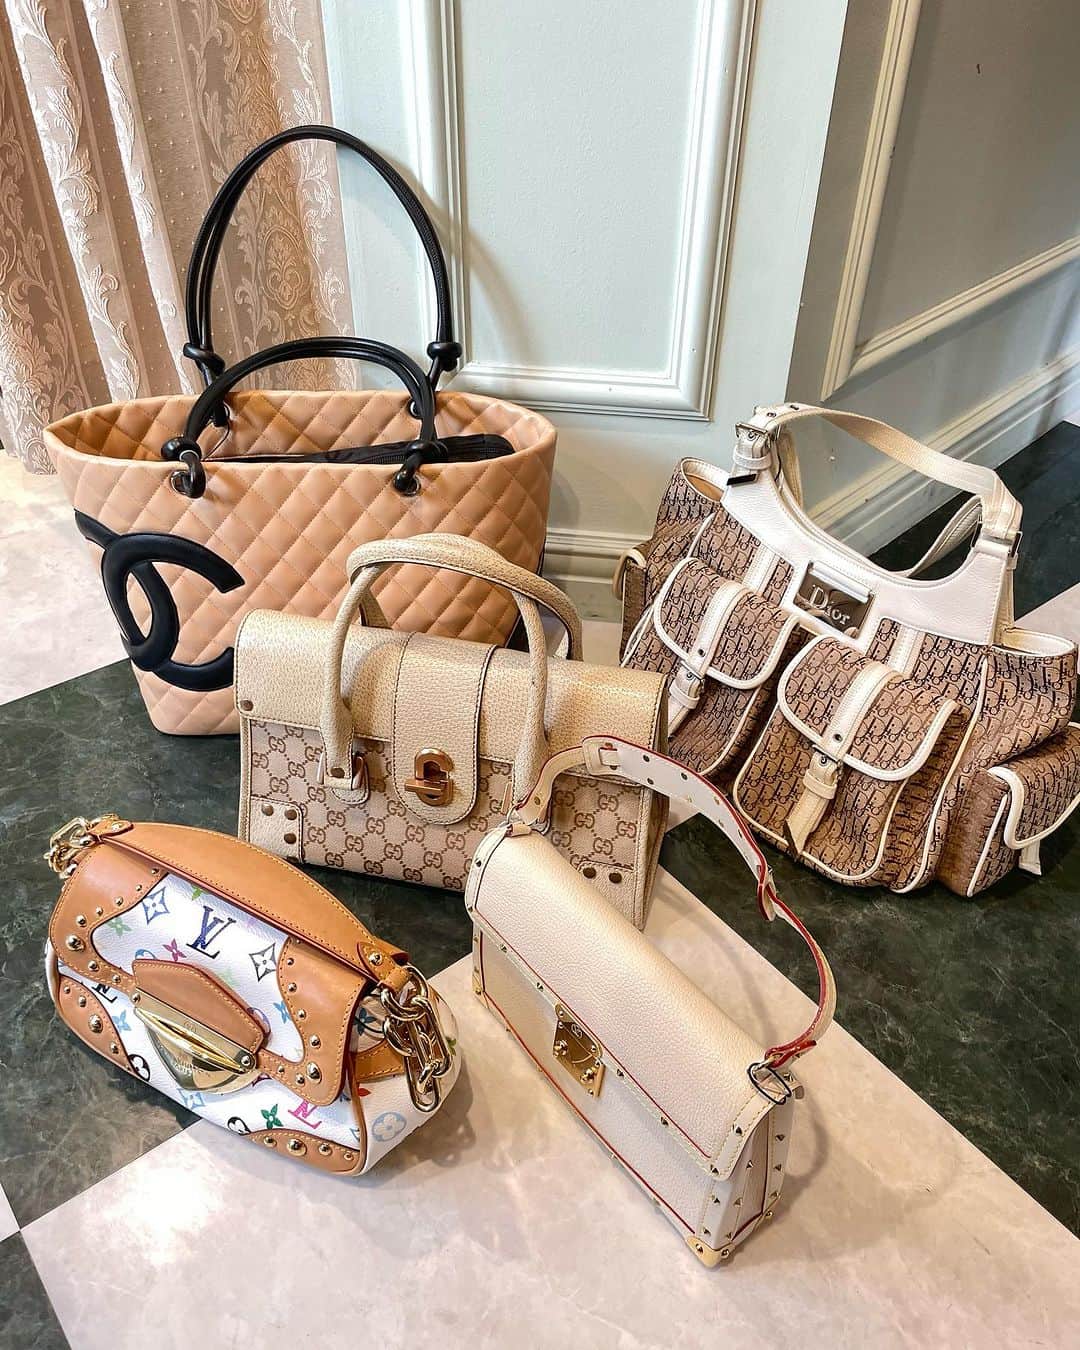 vintage Qooのインスタグラム：「Choose a bag for the new season at @vintageqoo   ▼Customer service English/Chinese/Korean/Japanese *Please feel free to contact us! *商品が見つからない場合にはDMにてお問い合わせください   ▼International shipping via our online store. Link in bio.  #tokyovintageshop #오모테산도 #omotesando #aoyama #表参道 #명품빈티지 #빈티지패션 #도쿄빈티지샵  #ヴィンテージファッション #ヴィンテージショップ  #chanelvintage #chanel #vintagechanel #chanelclassic #chanellover #빈티지샤넬 #샤넬  #シャネル #샤넬클래식 #gucci #dior #diorbag #guccibag #louisvuitton #louisvuittonbag #グッチ #ディオール #ルイヴィトン」